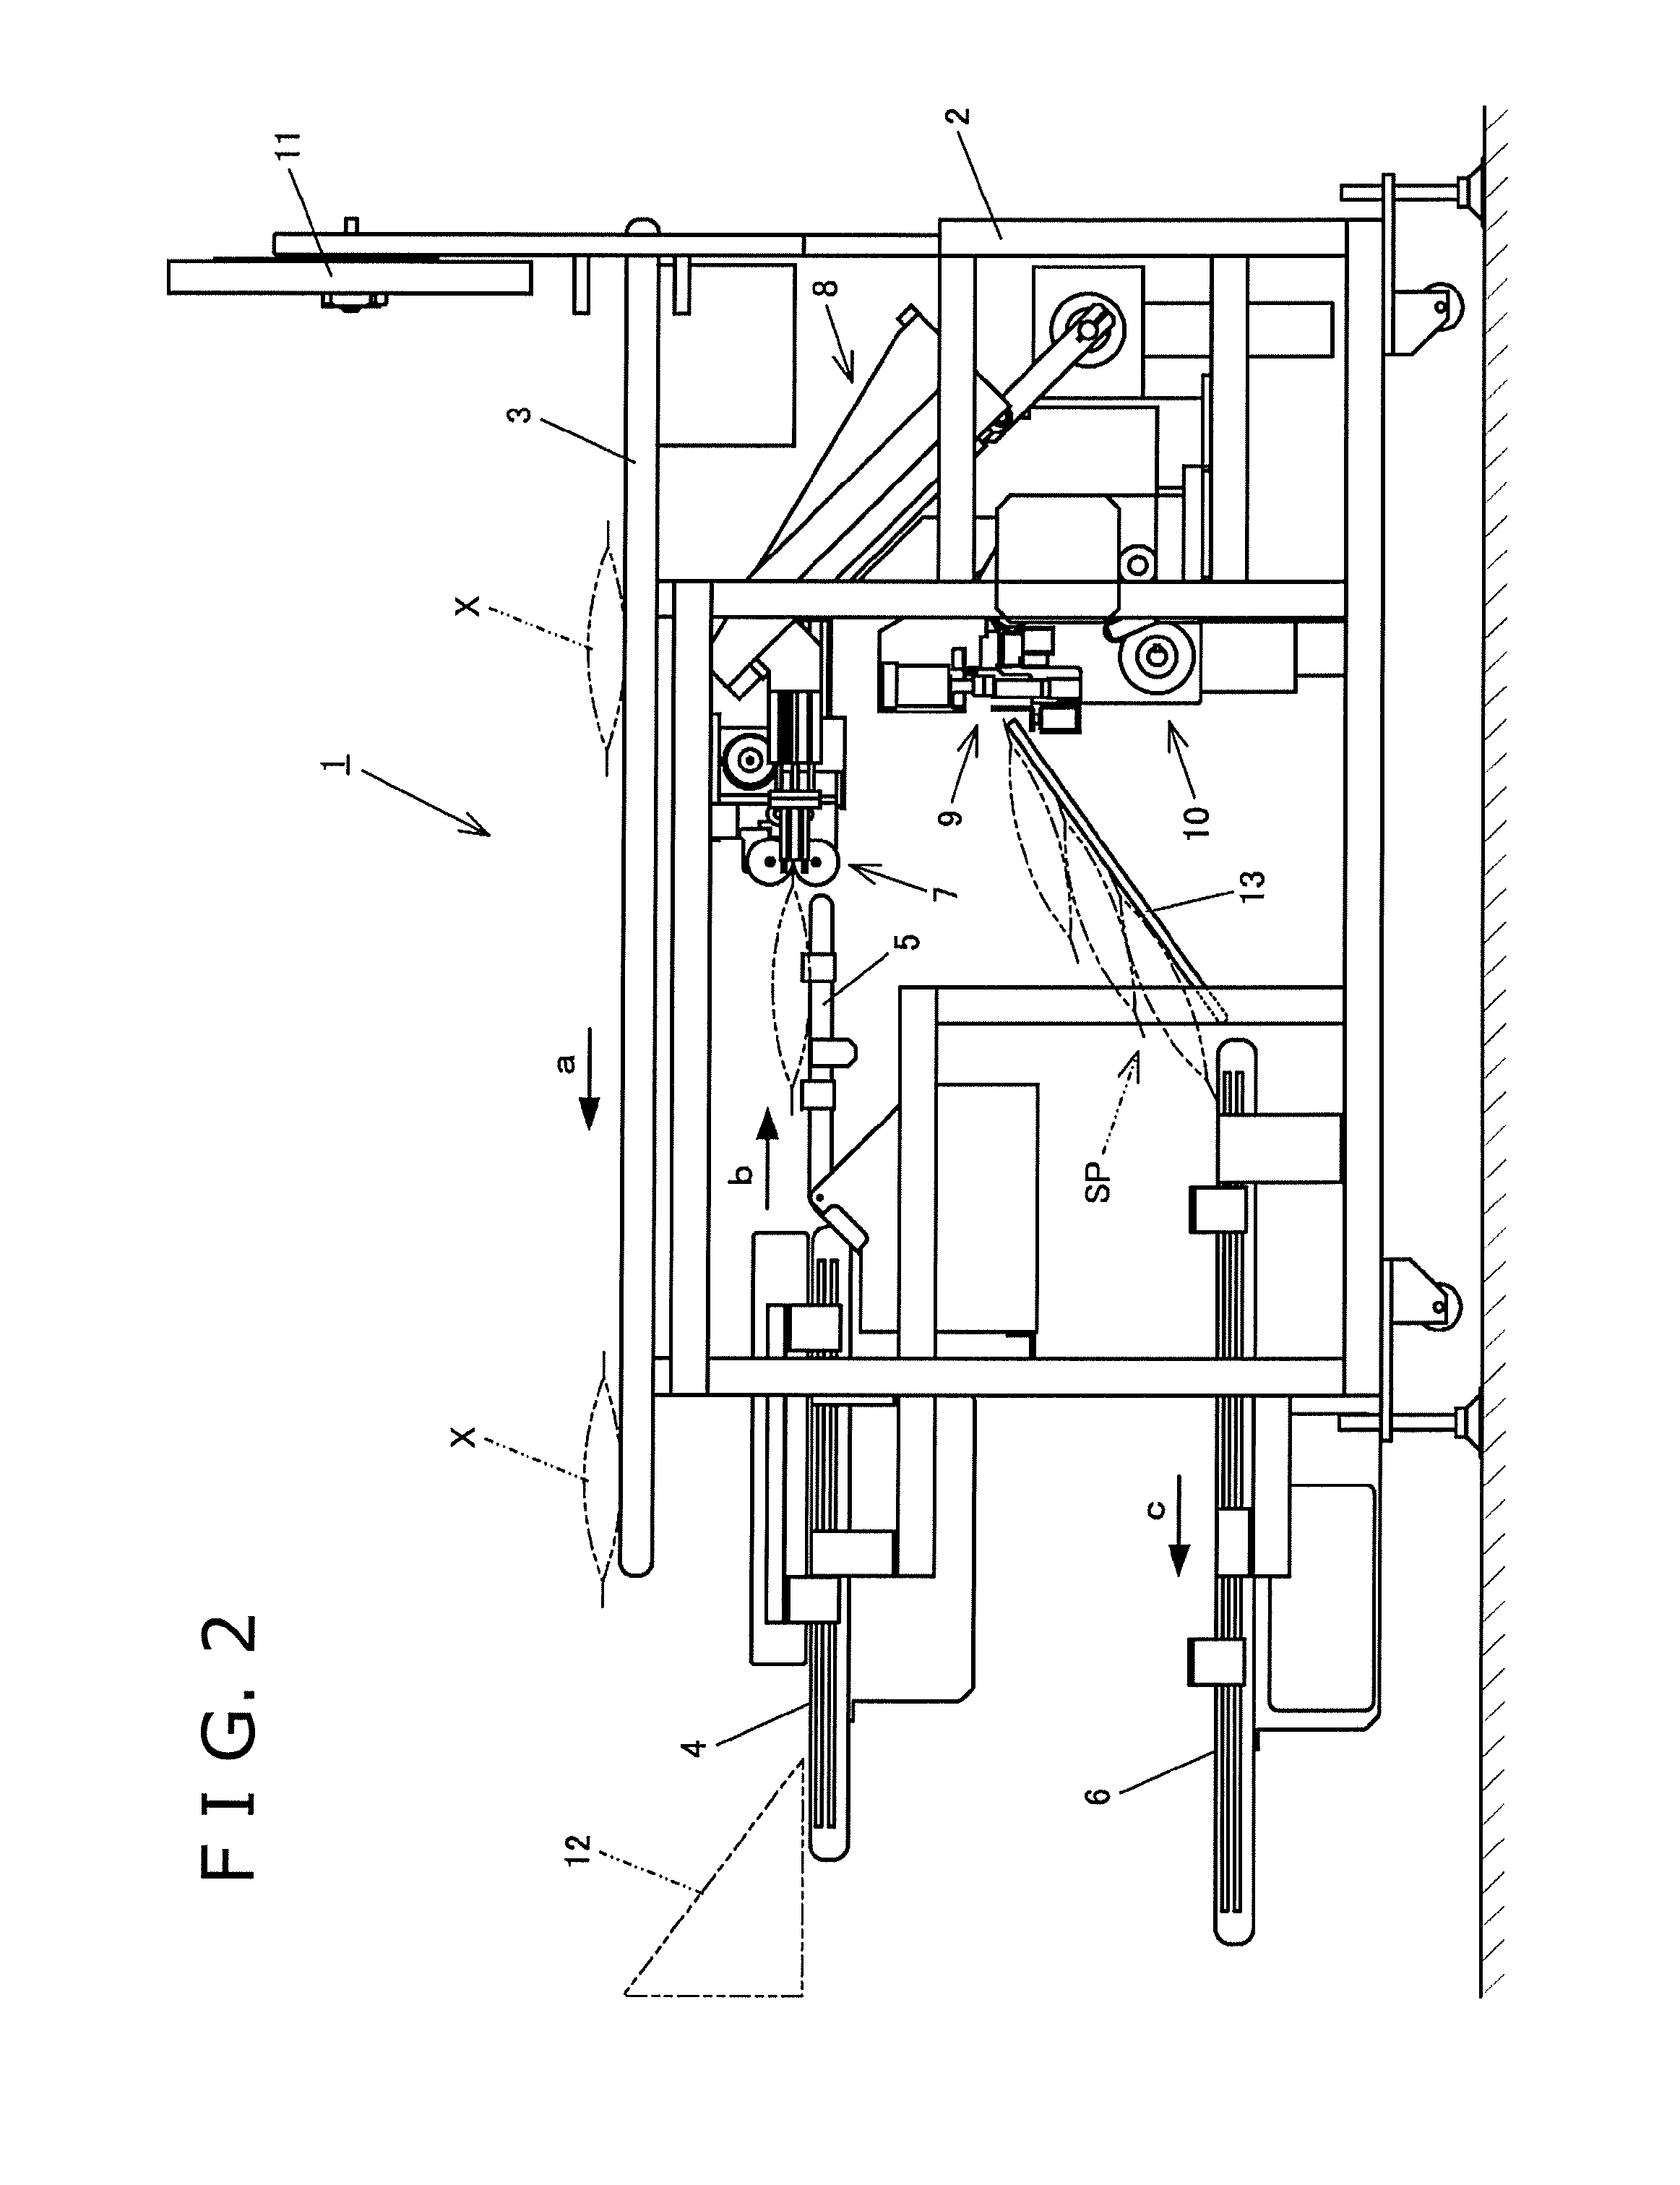 Strip pack apparatus, and grasper device and dewrinkler device used therein